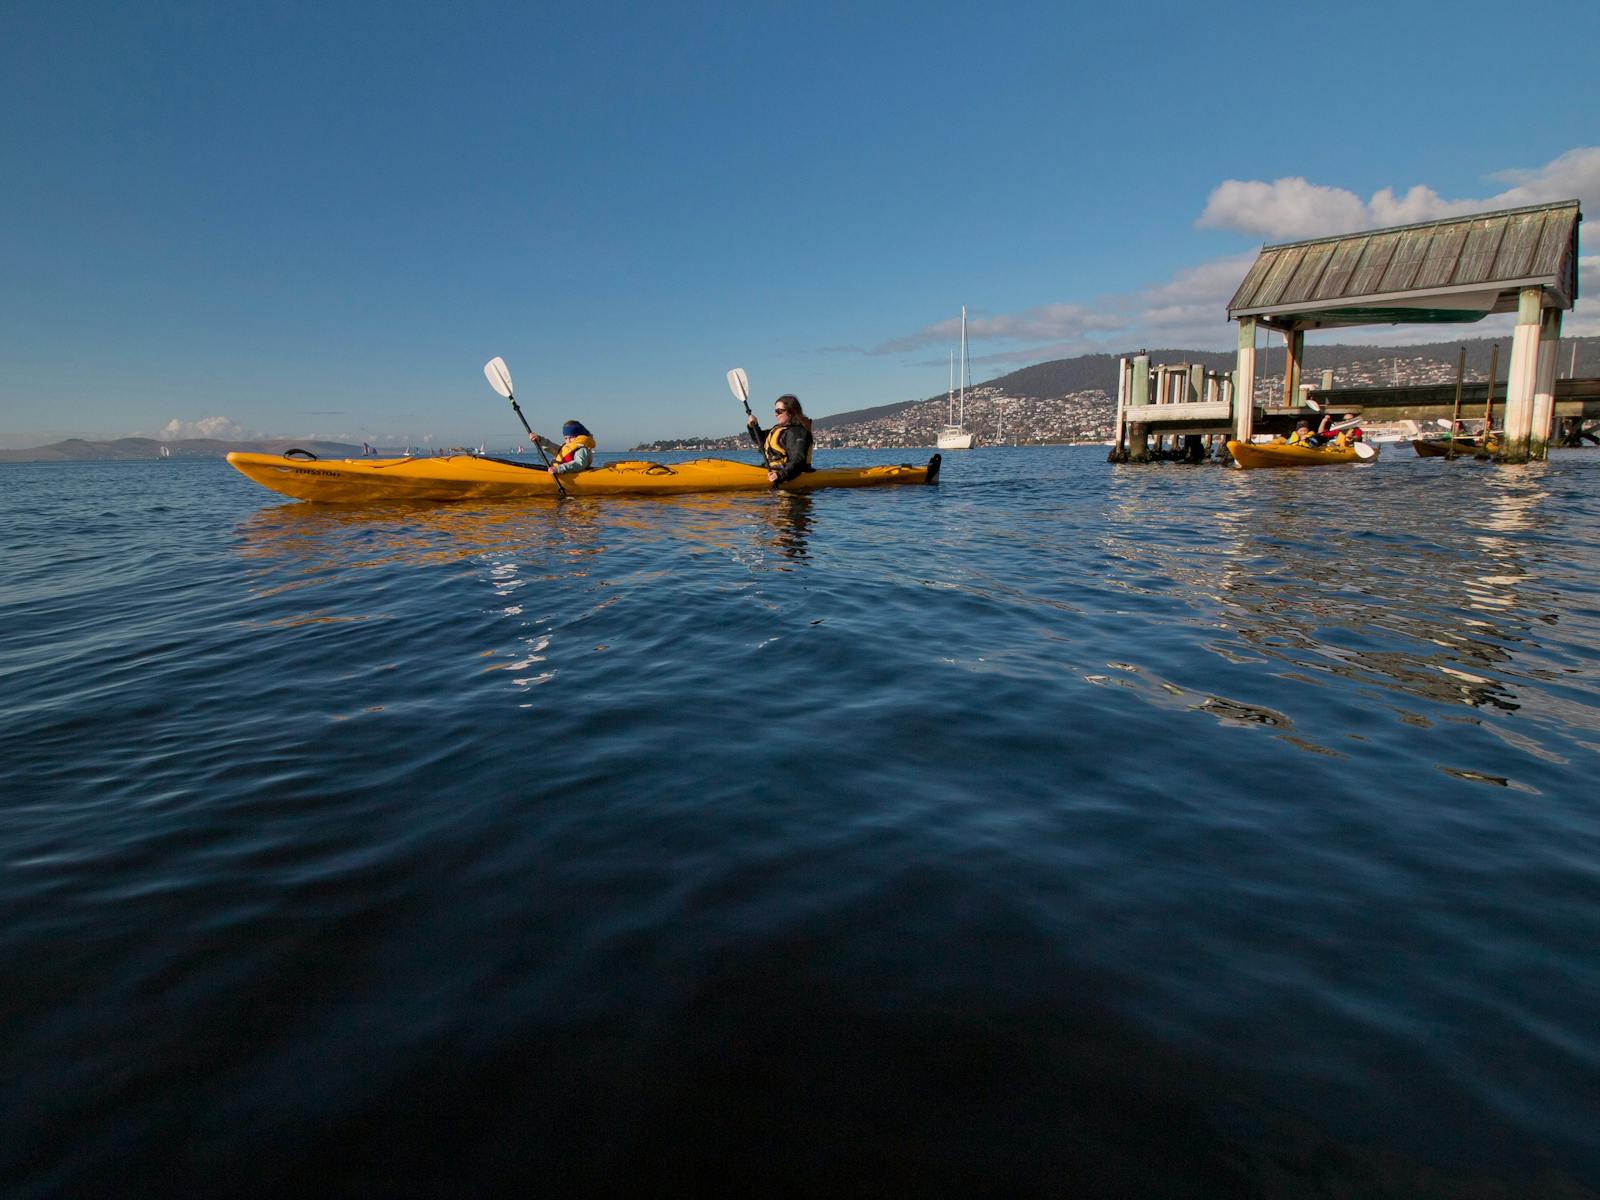 Kayakers on the Derwent River with jetties in the background